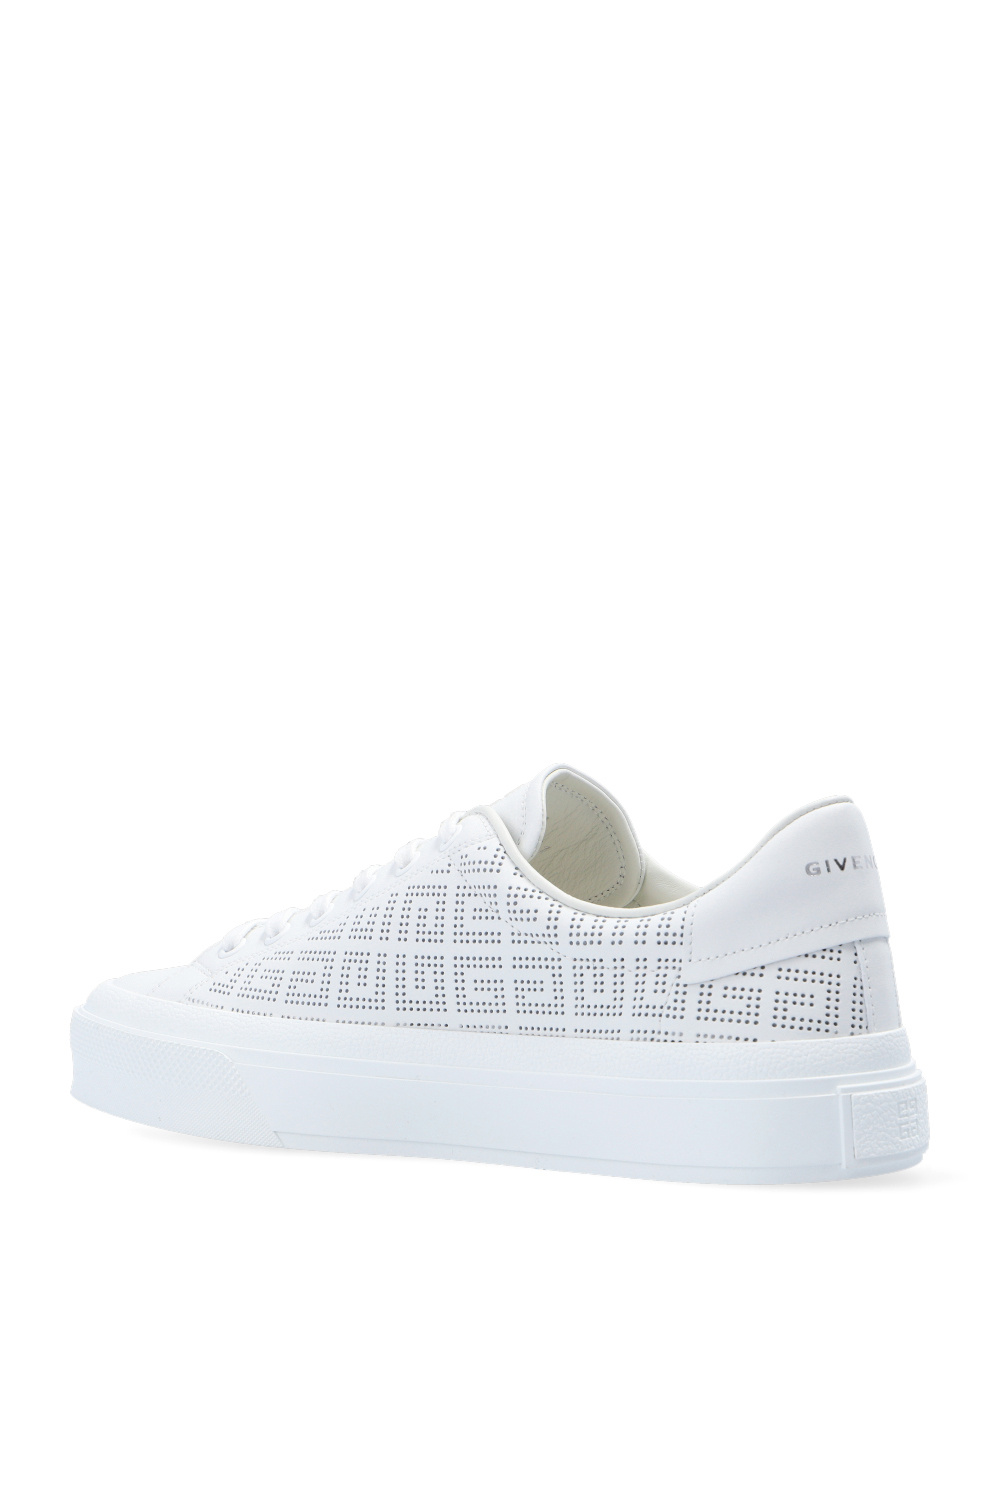 Givenchy City platform leather sneakers - White